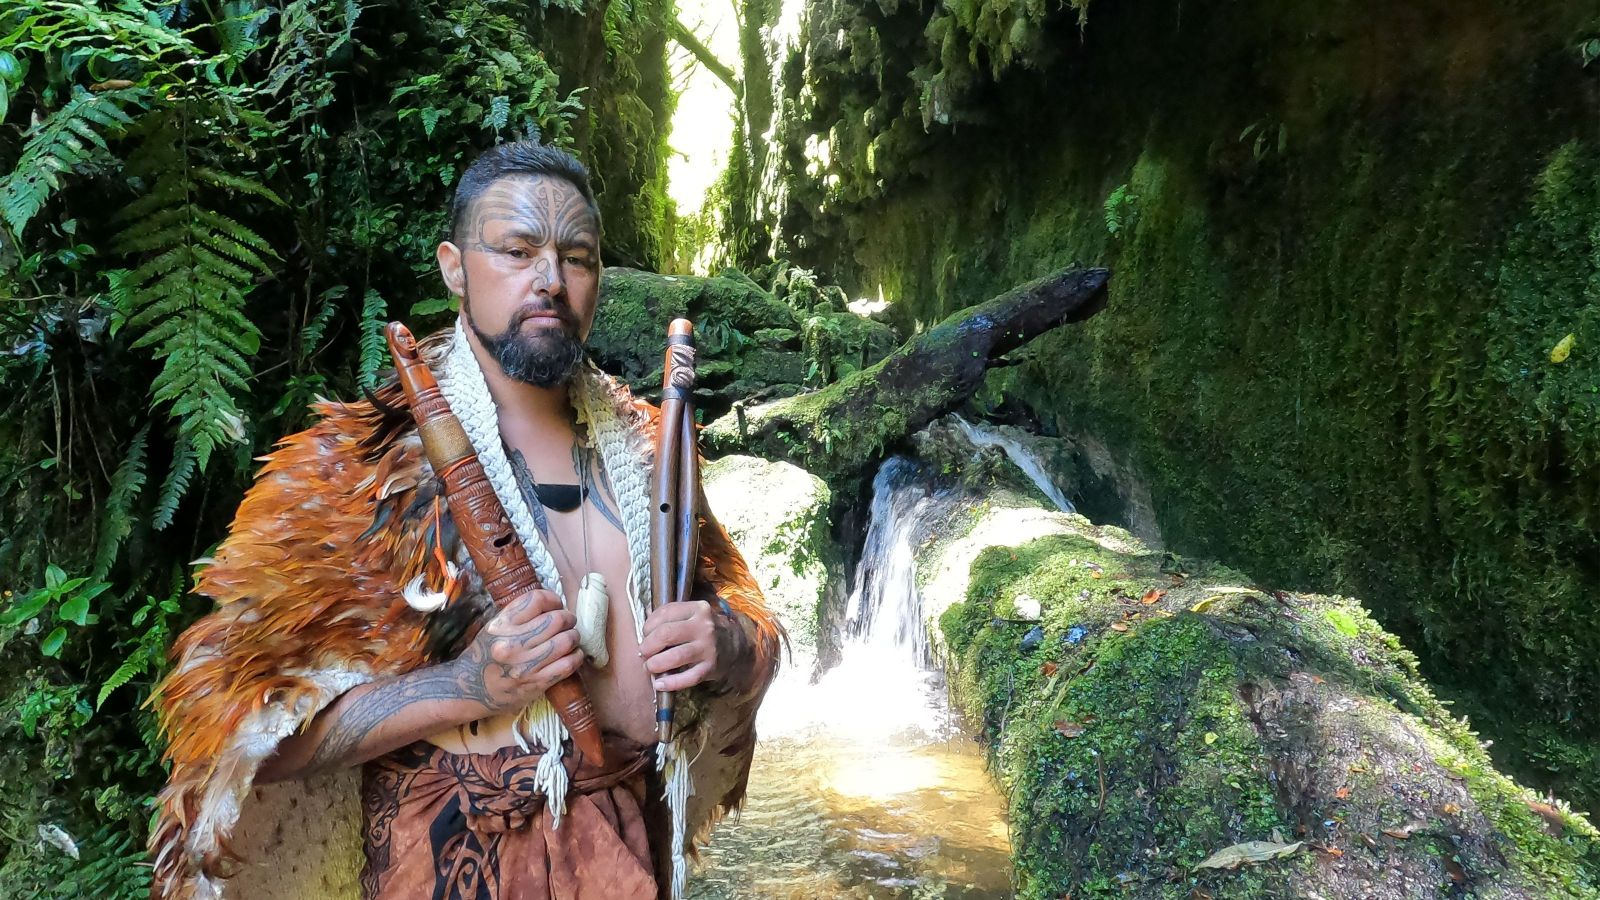 Man with māori cloak holding traditional taonga puoro instruments against natural background